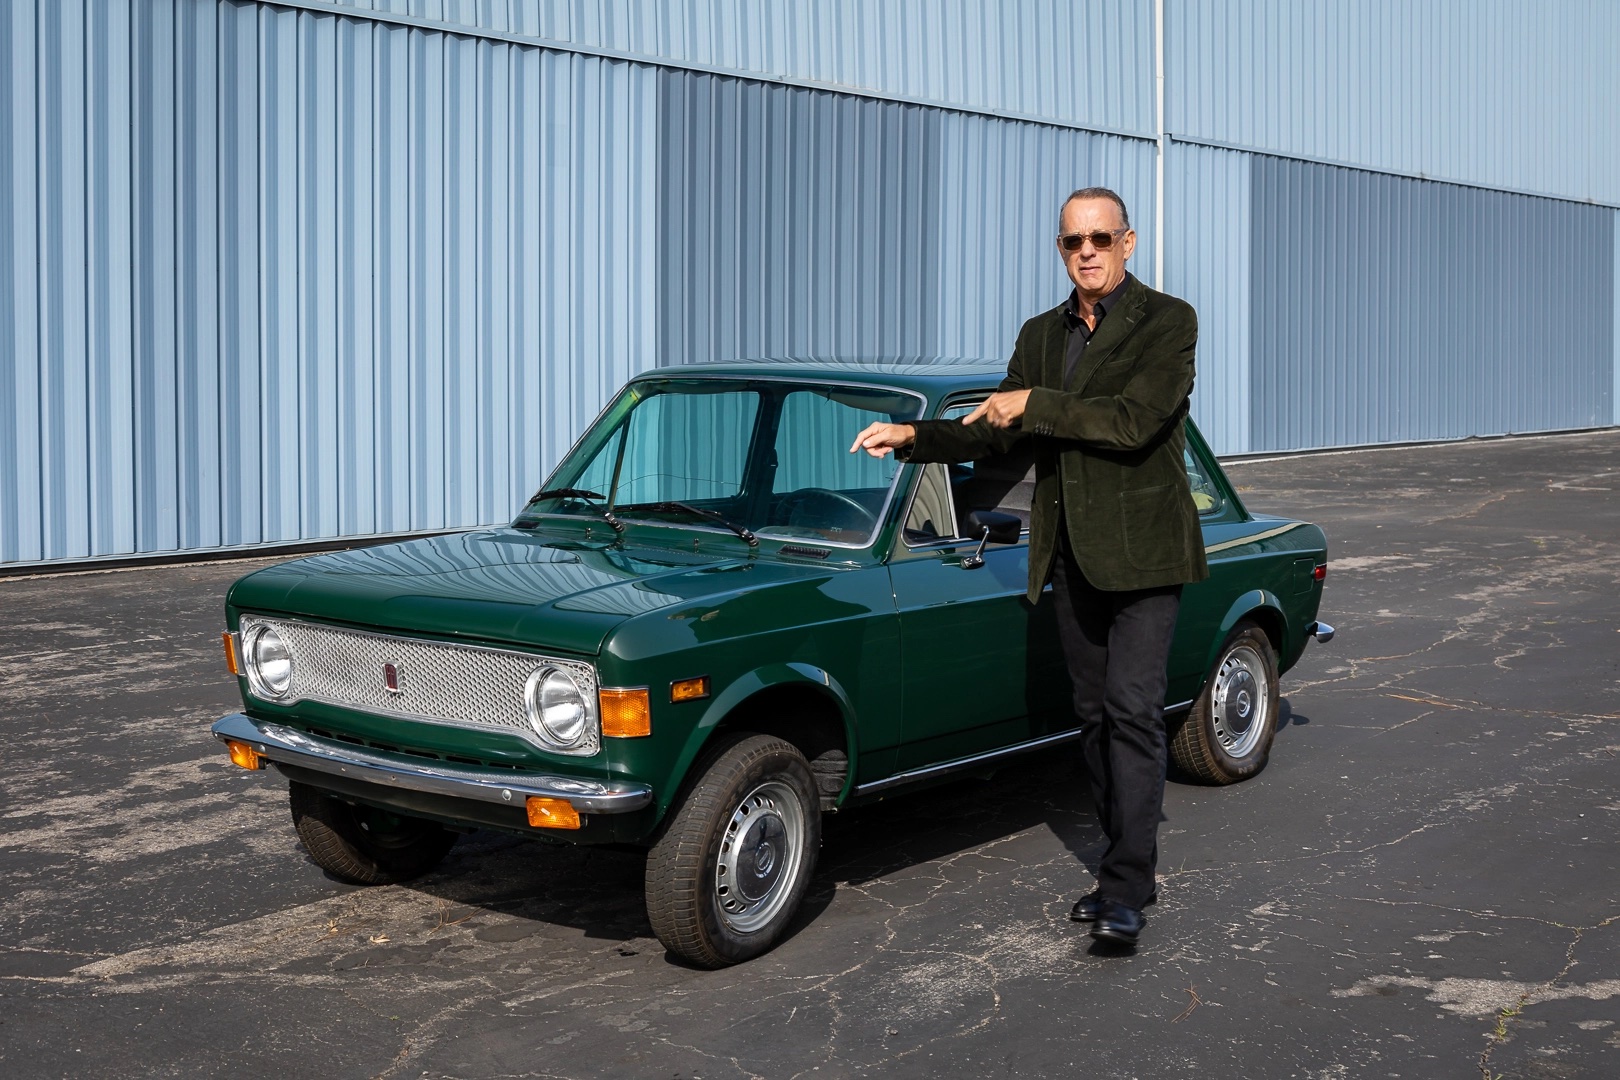 Will you fall for Tom Hanks’ Fiat 128?